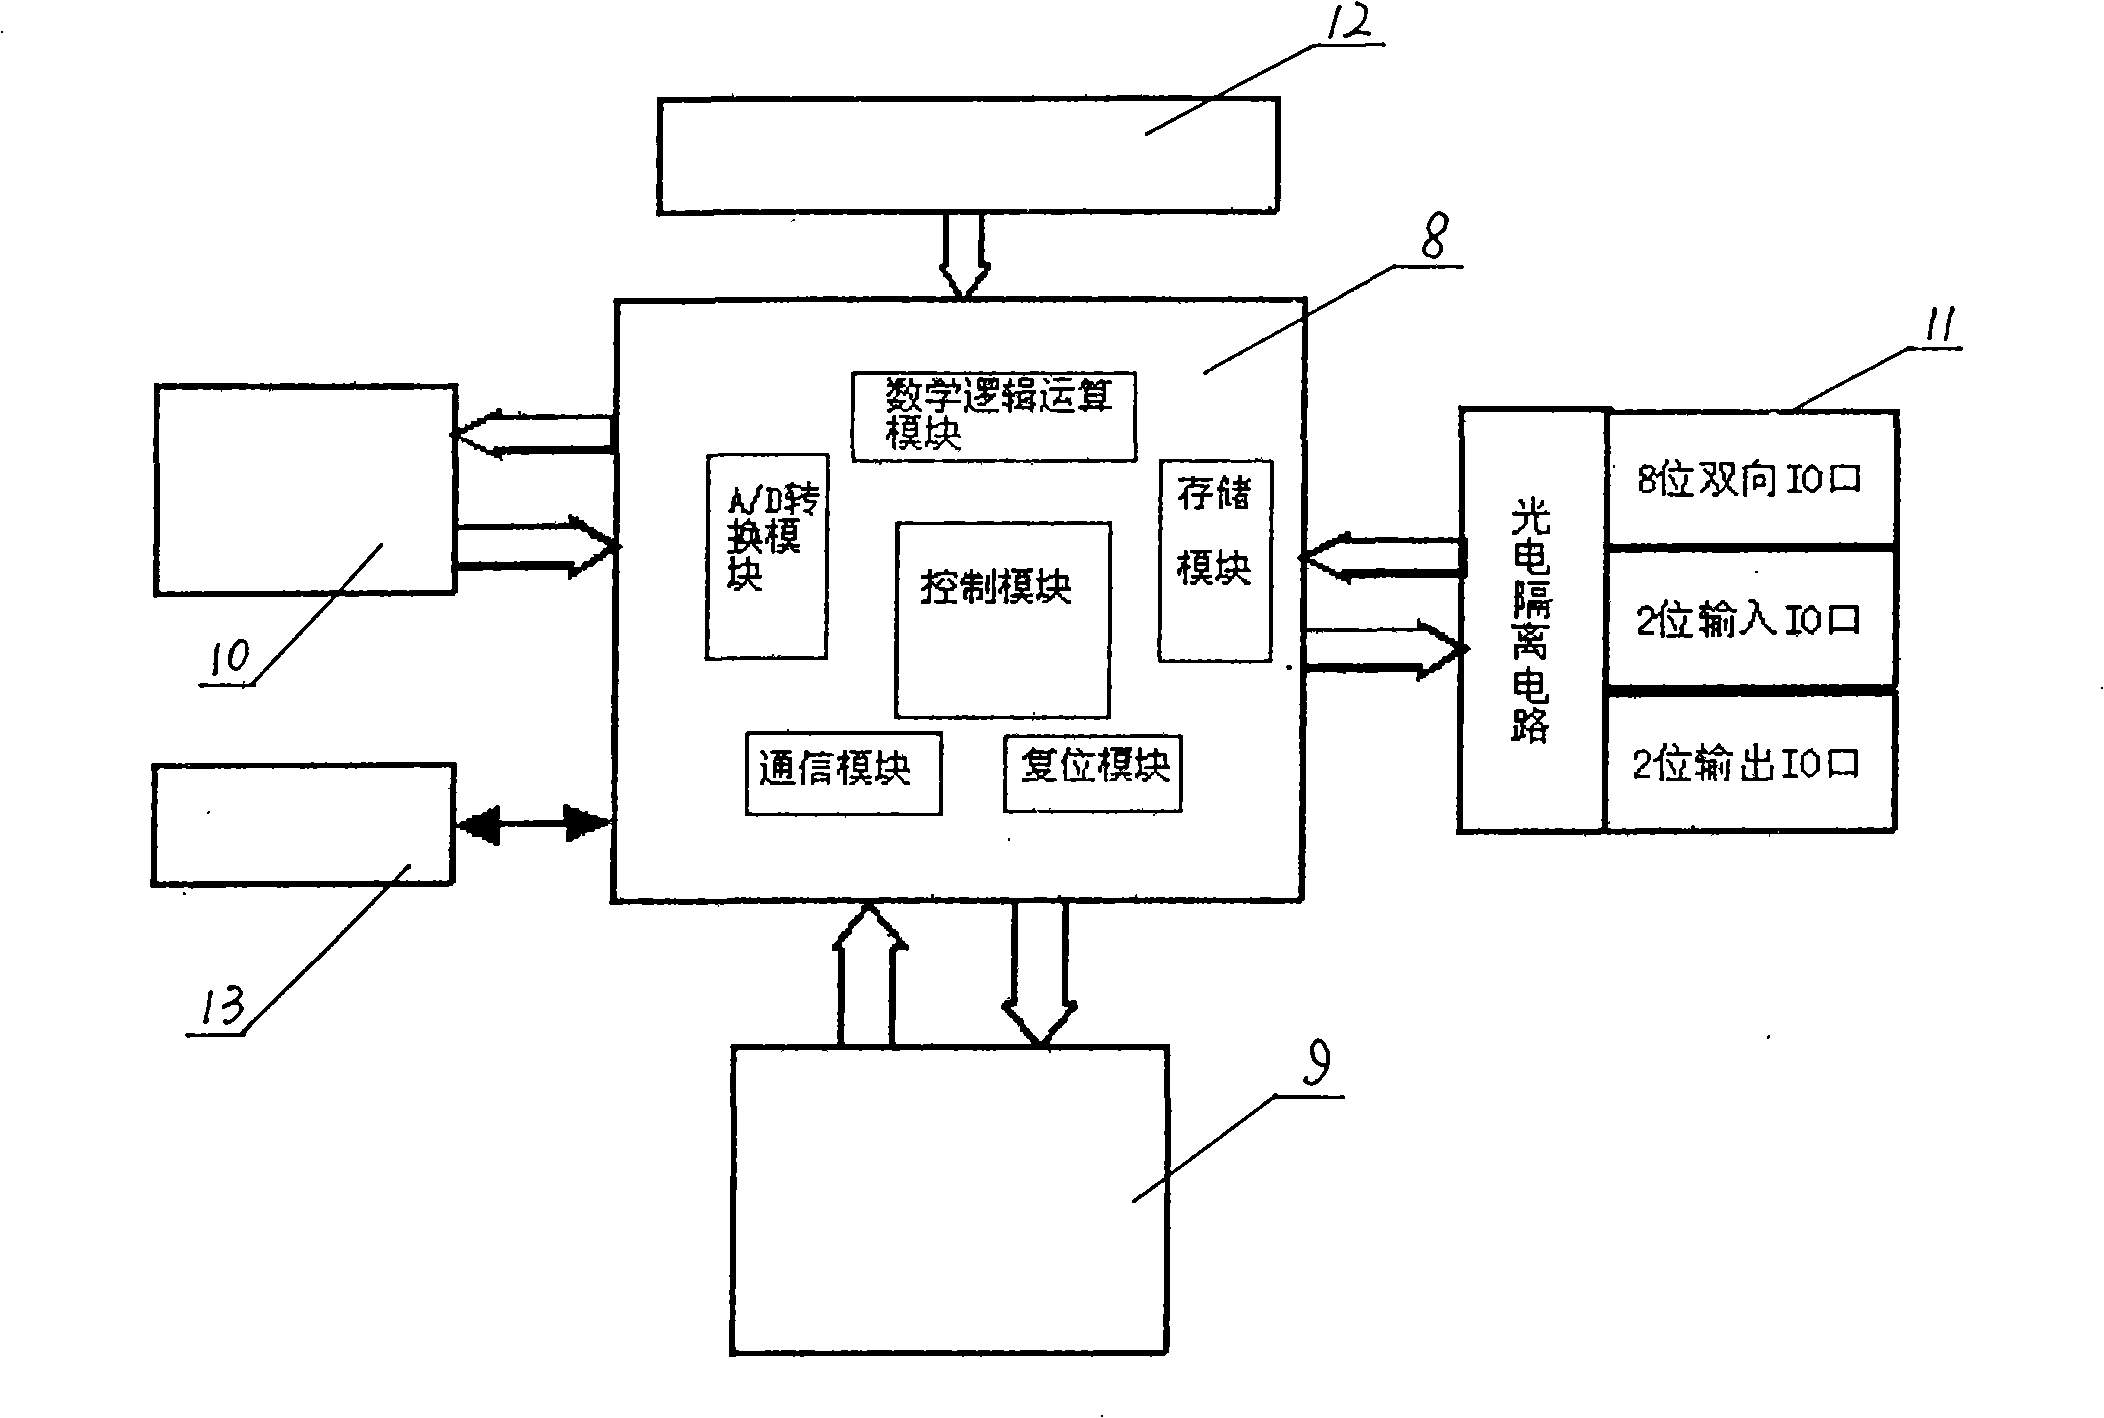 Bleaching and dyeing control technology and its control device